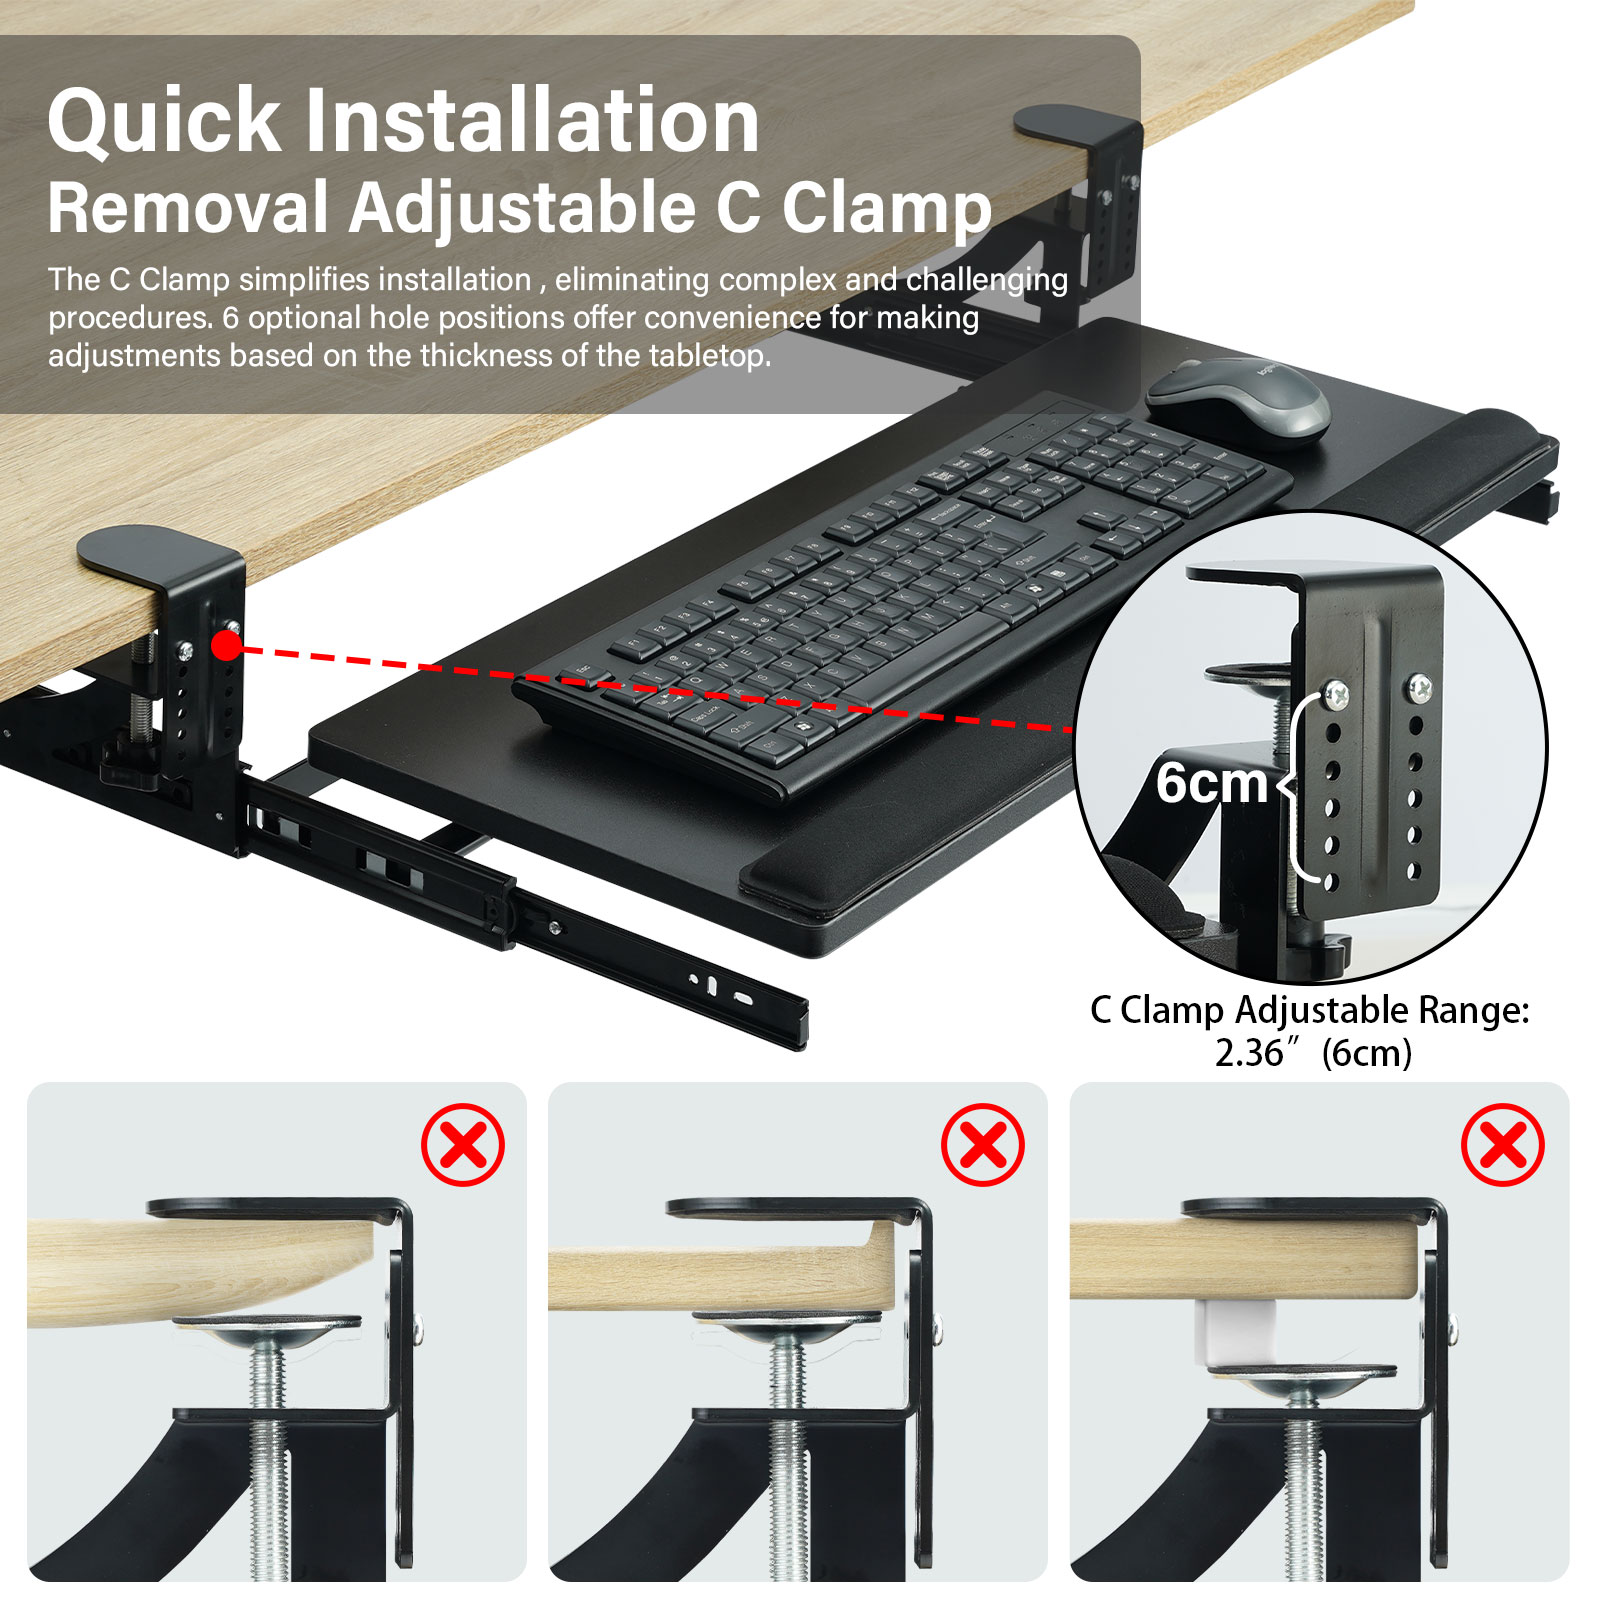 TOPSKY Adjustable Under-Desk Keyboard Tray, 26.8”x11” Pull Out Keyboard and Mouse Tray with Tilted Mechanism and C Clamp for Home and Office KB-001